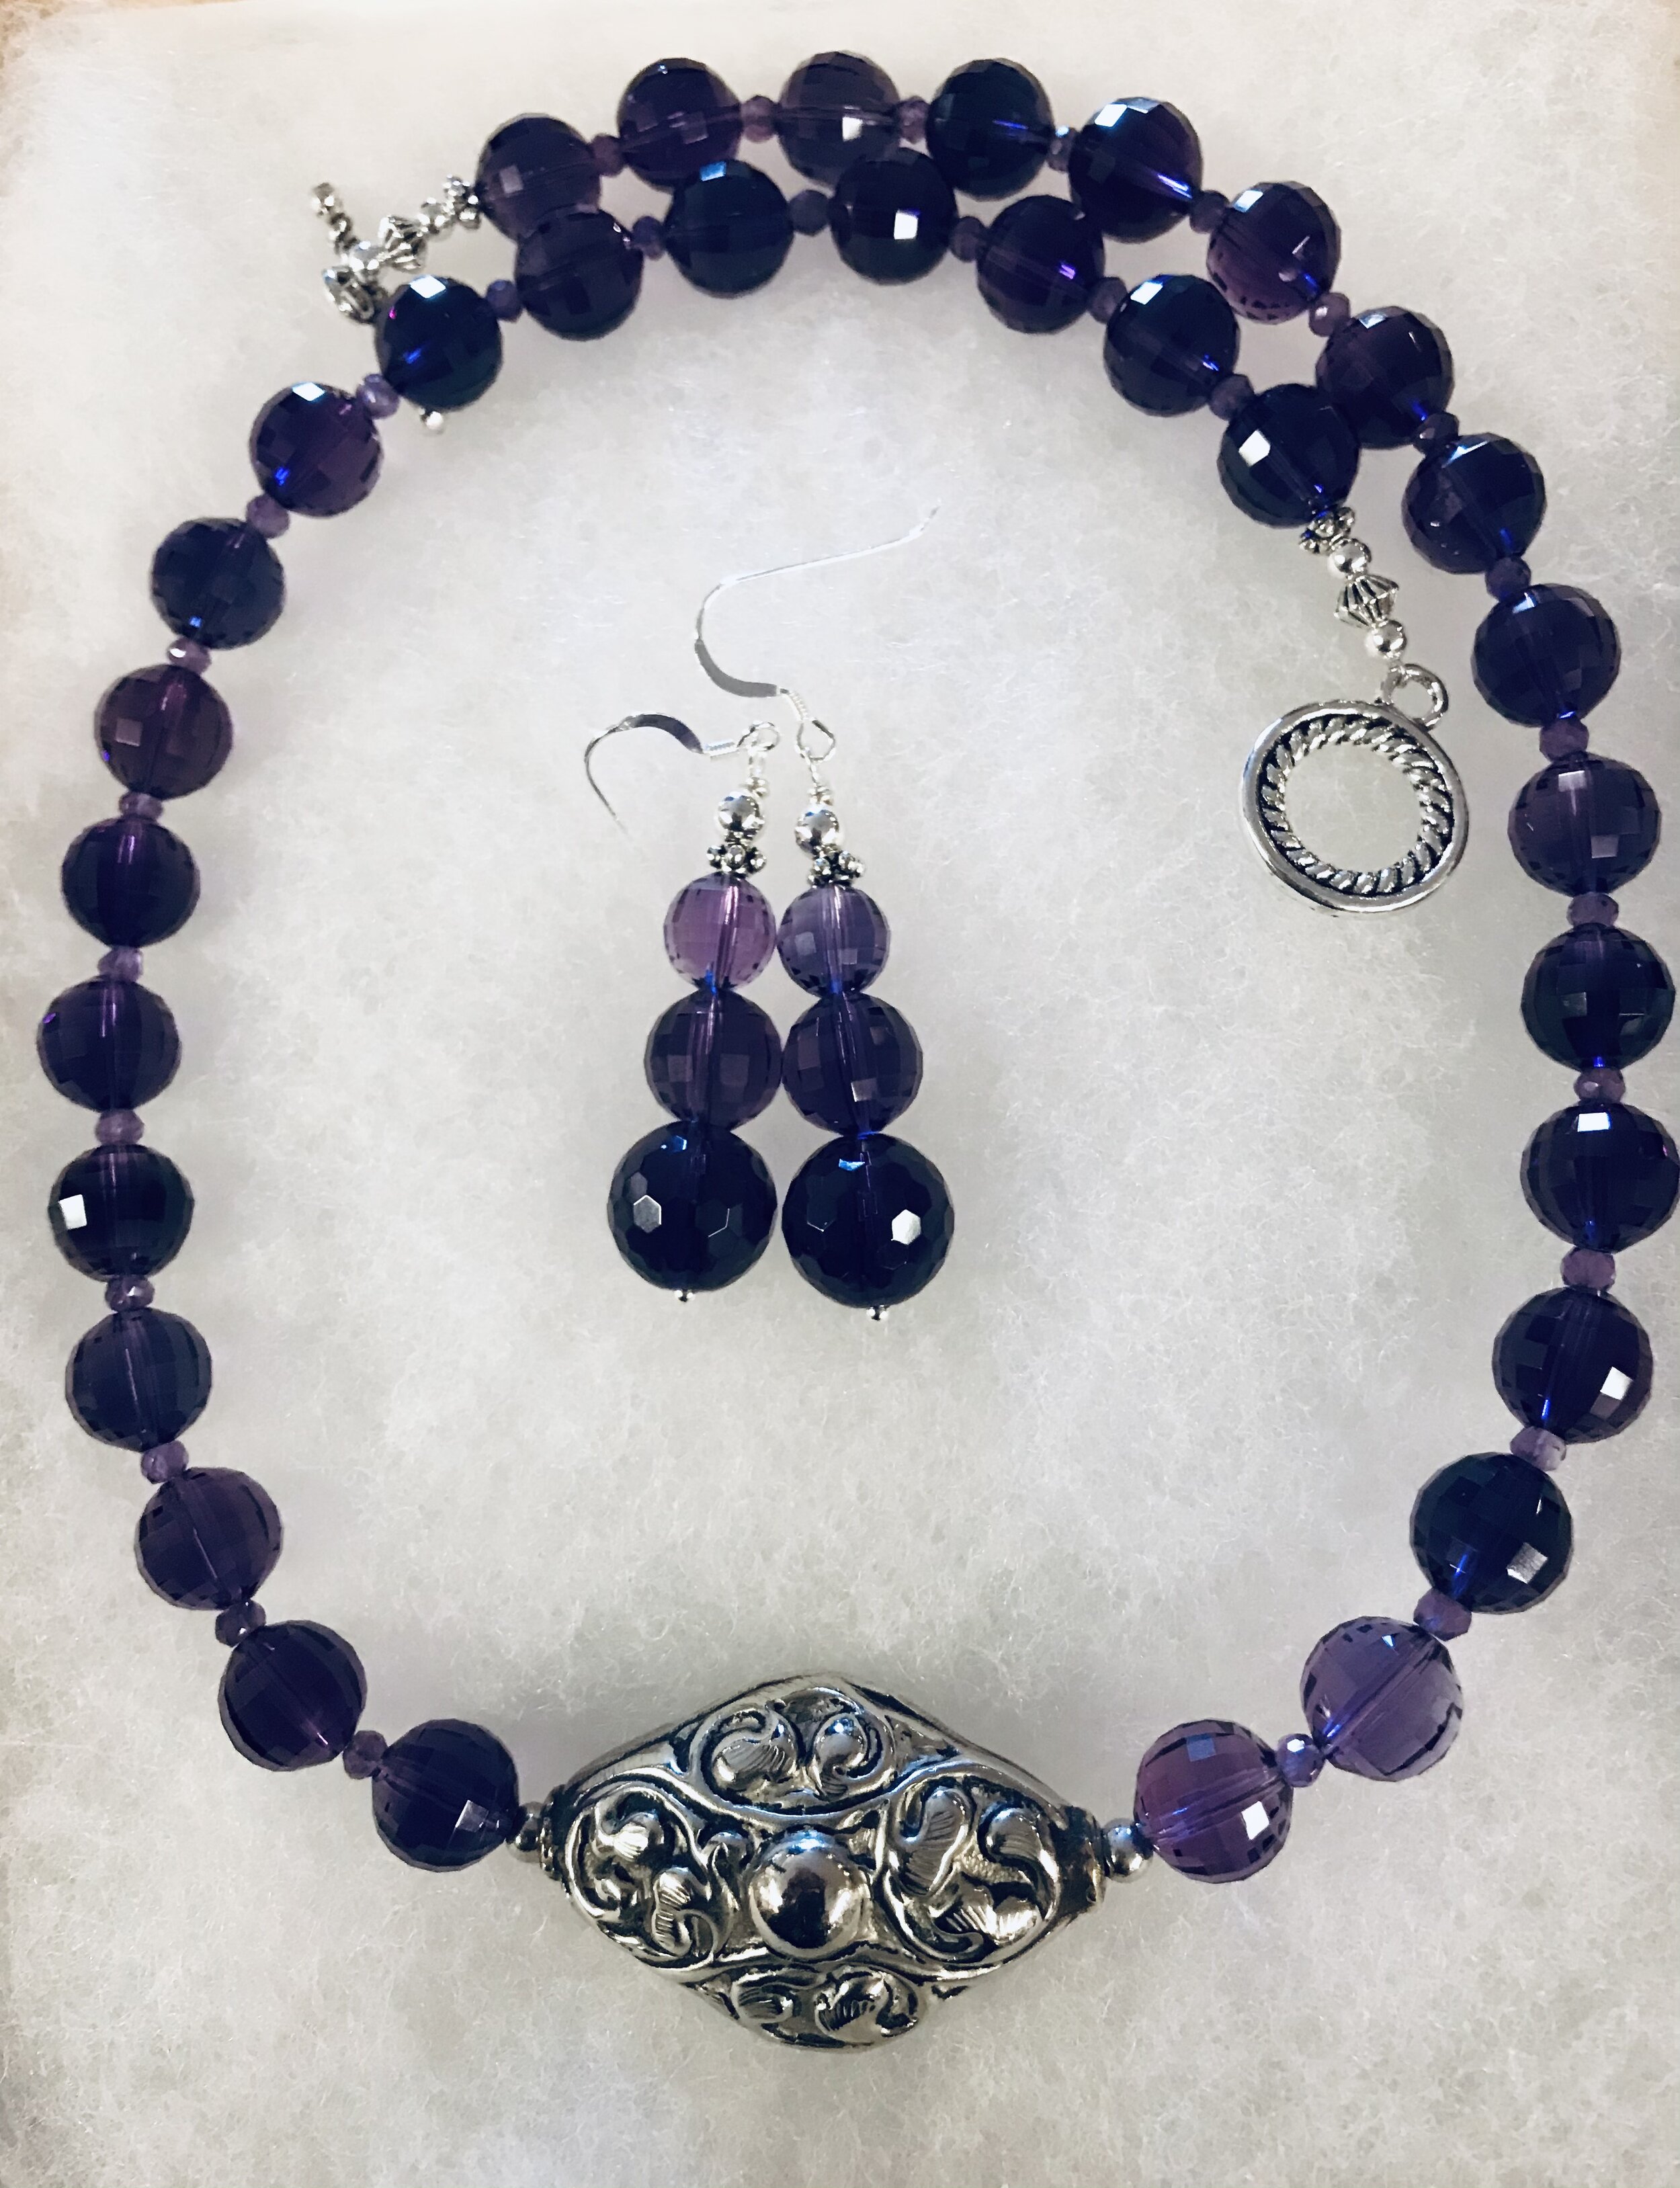   Amethyst with Nepalese focal bead set.   $48.99 